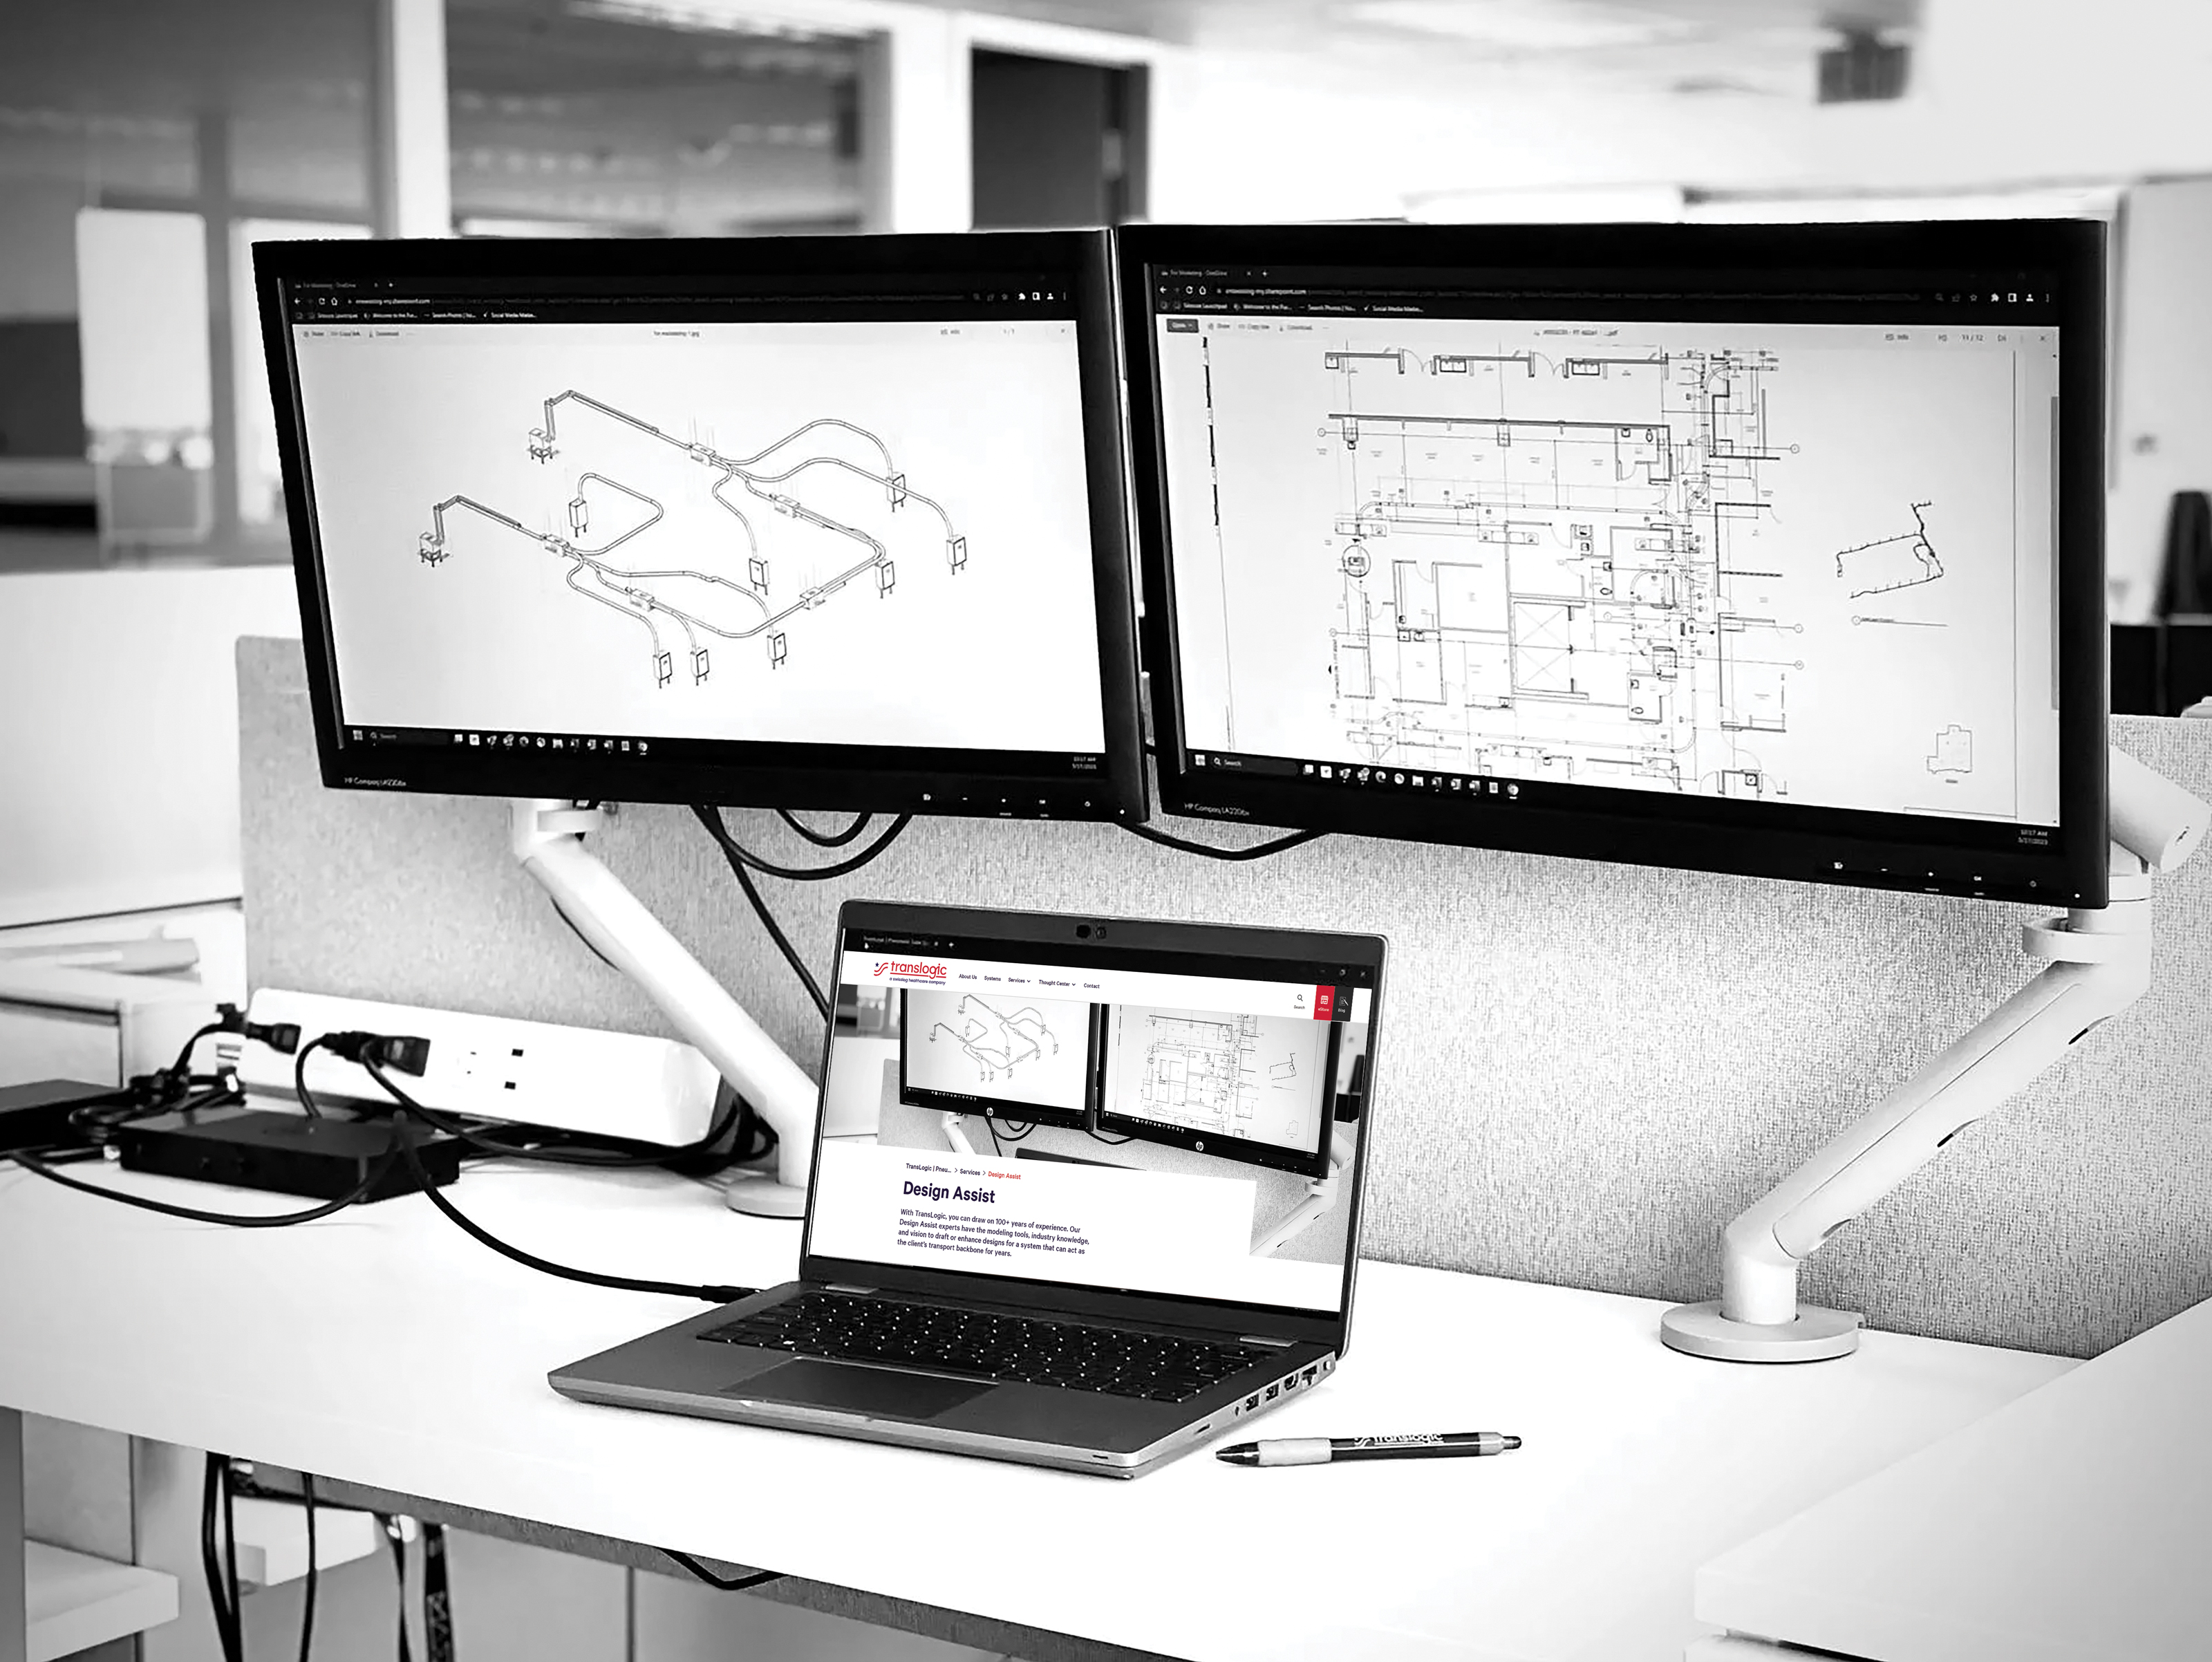 two computers showing bim 3d model and design plans